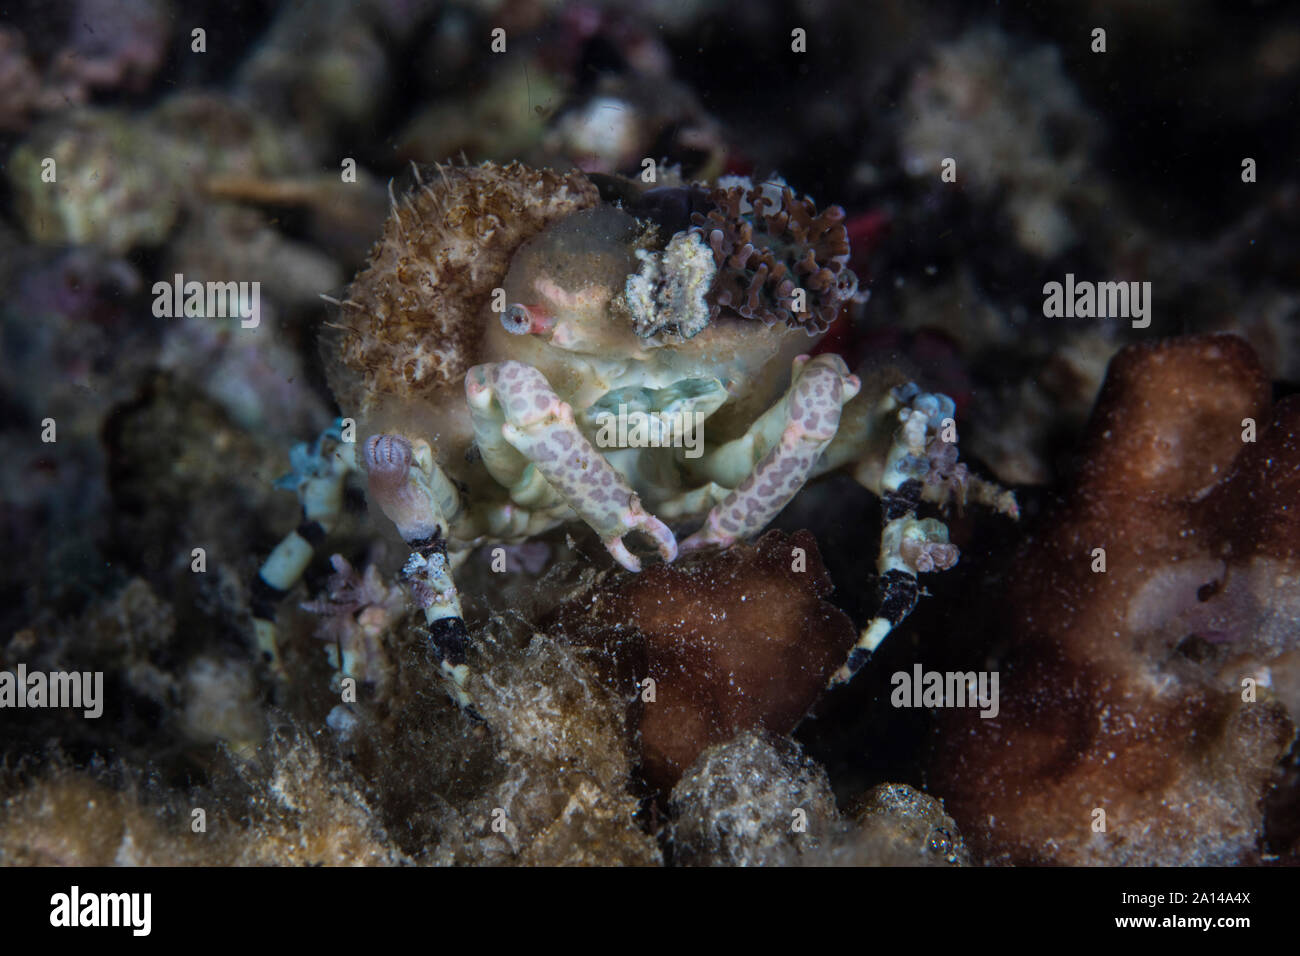 A decorator crab crawls over a reef at night in Komodo National Park, Indonesia. Stock Photo